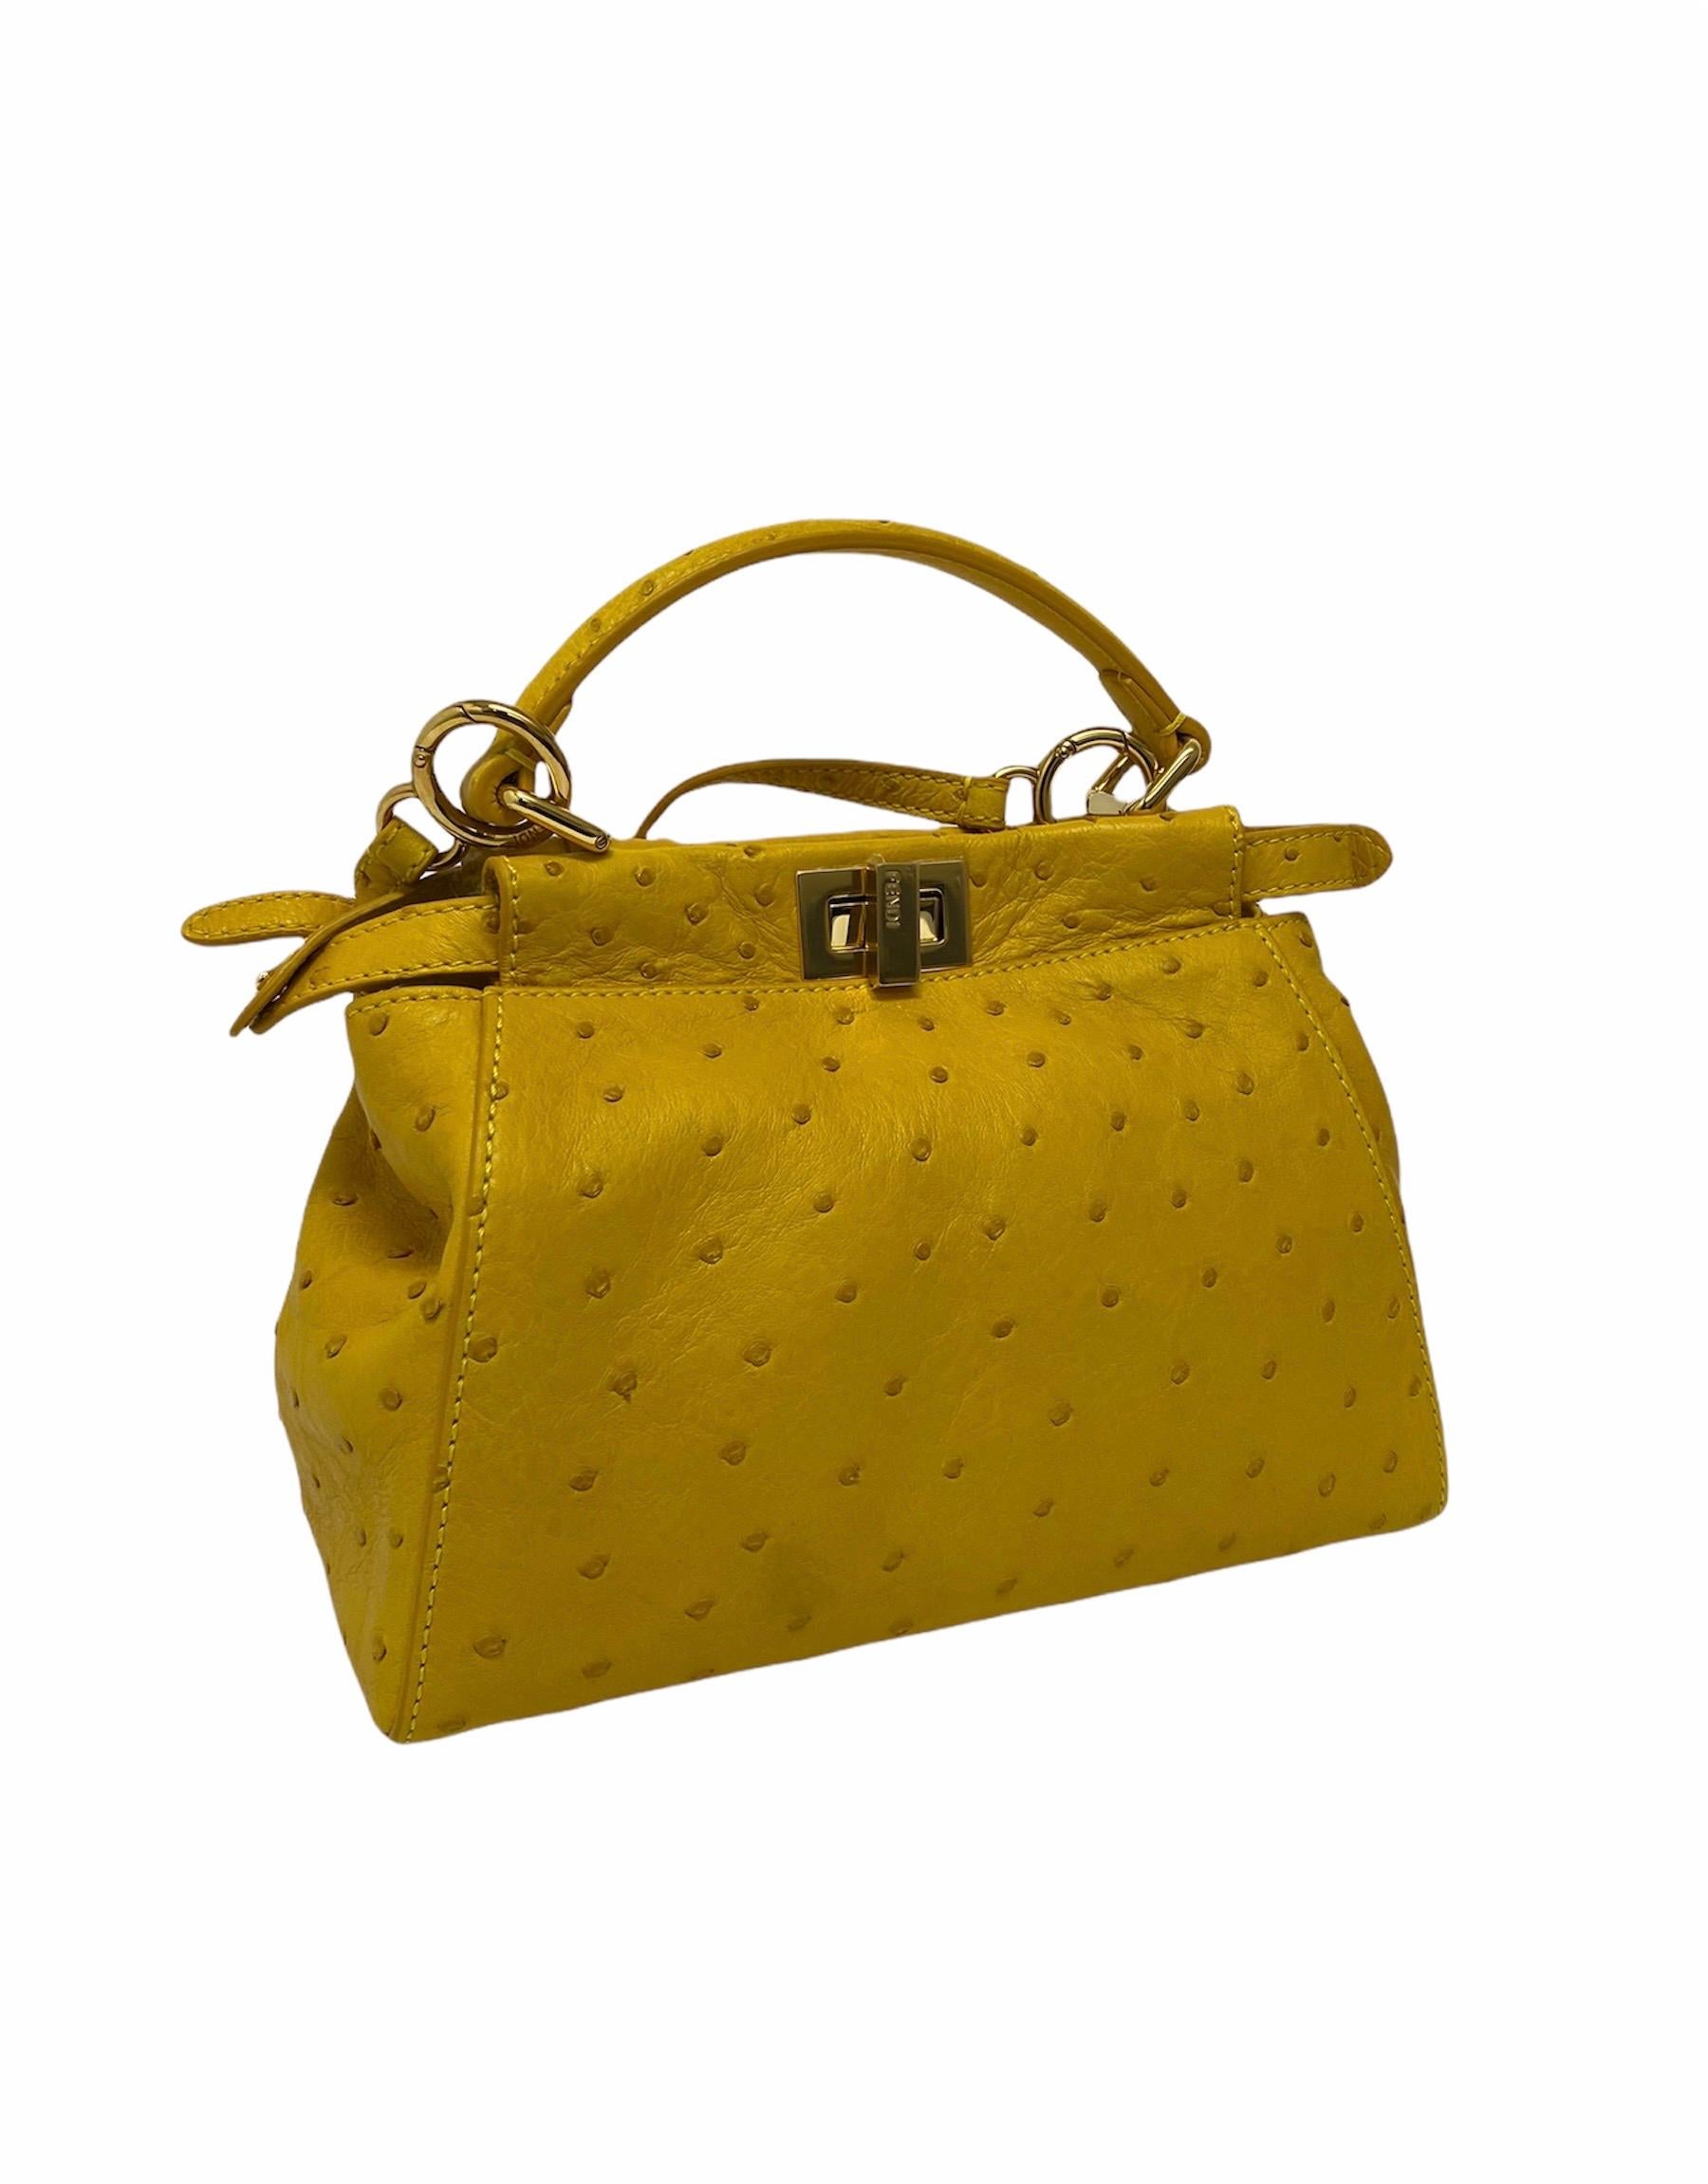 Fendi Peekaboo model bag made of yellow ostrich leather with golden hardware. Closure with hook, internally quite large and equipped with pockets. Equipped with leather handle and removable shoulder strap. The bag is in like new condition.